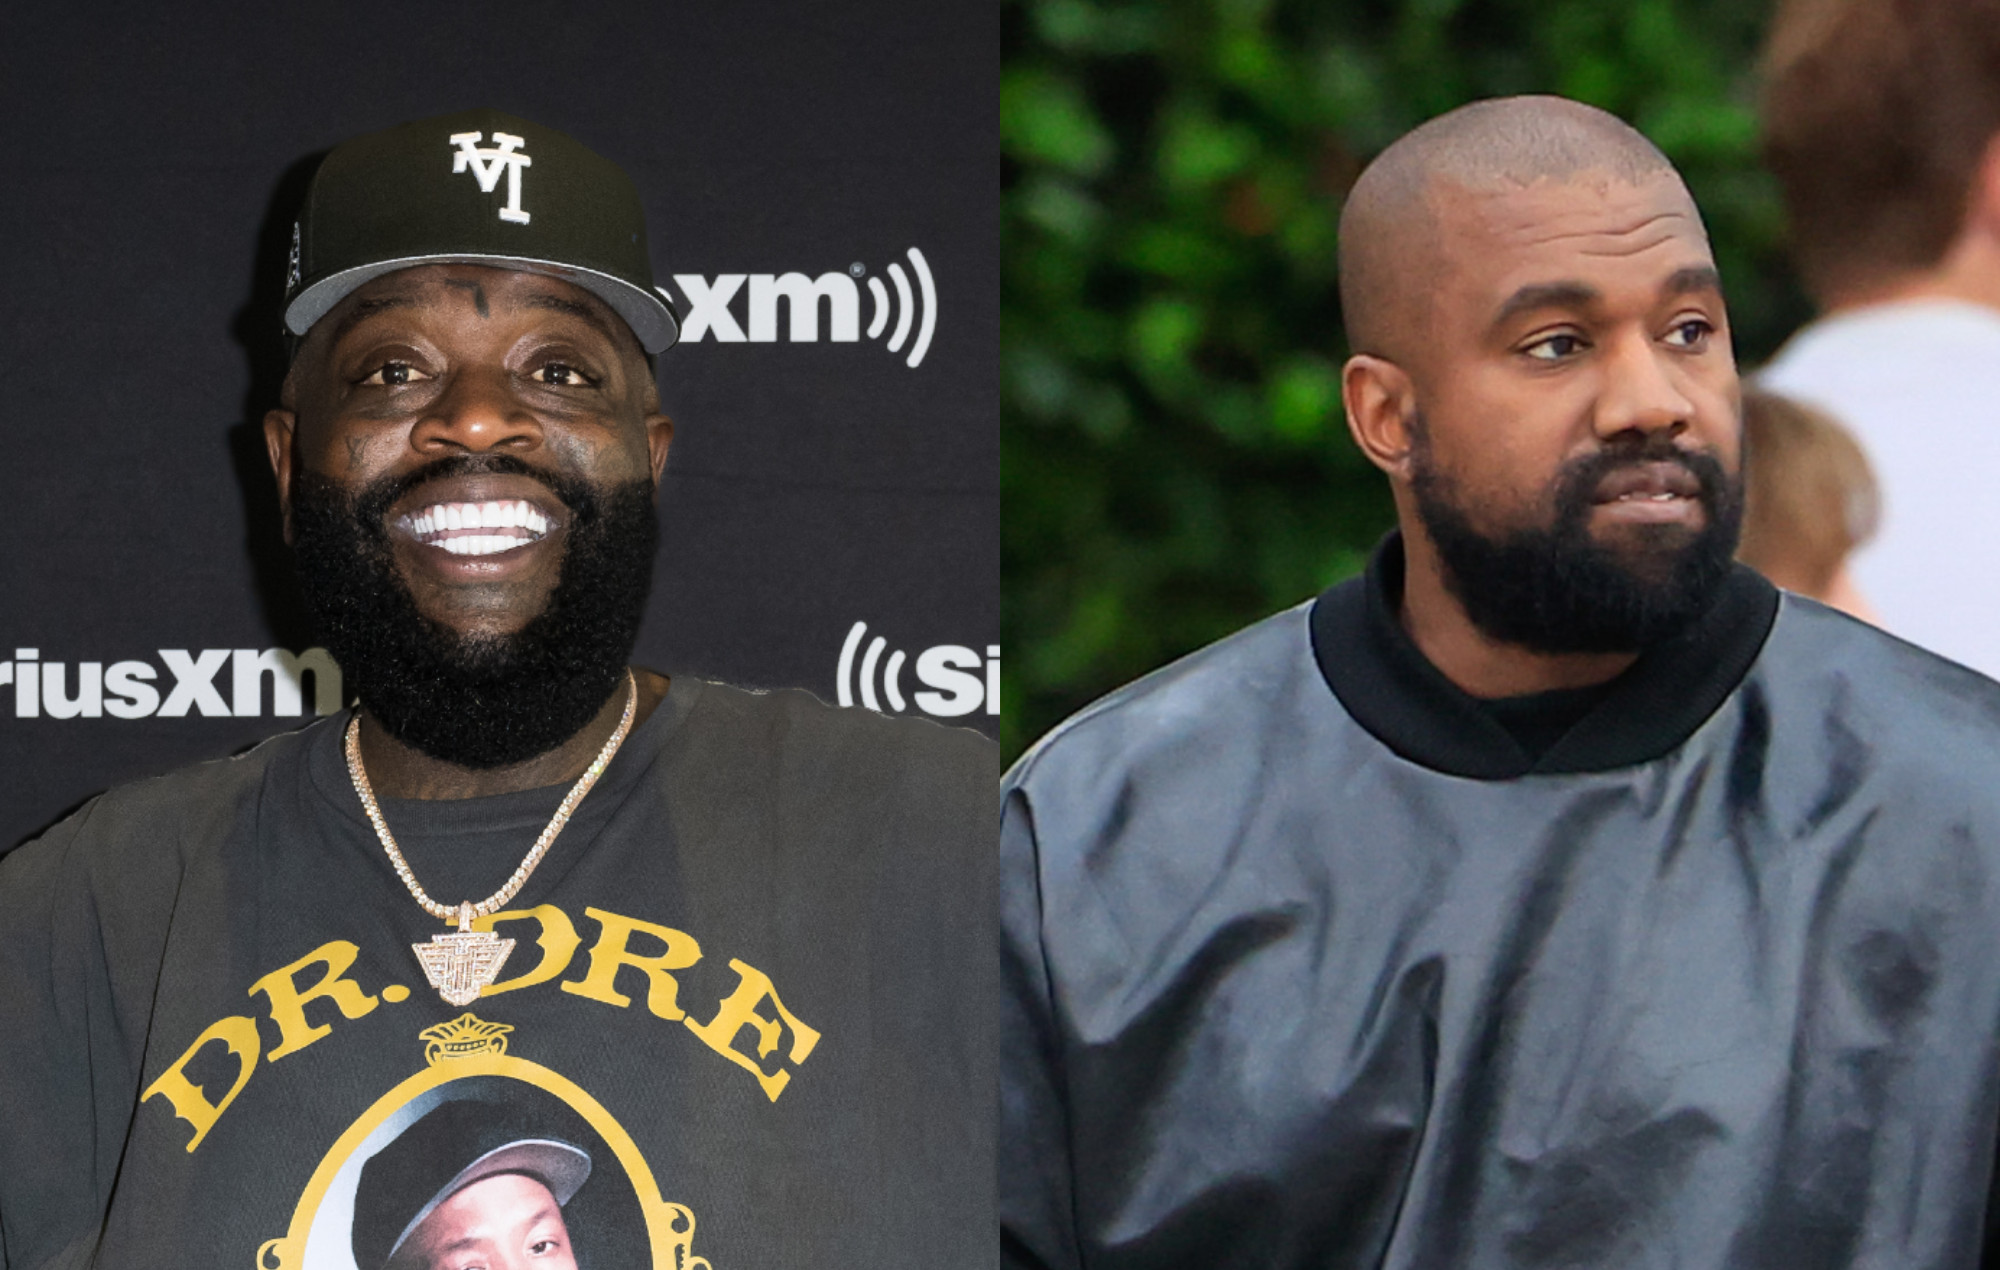 Rick Ross is "interested" in signing Kanye West